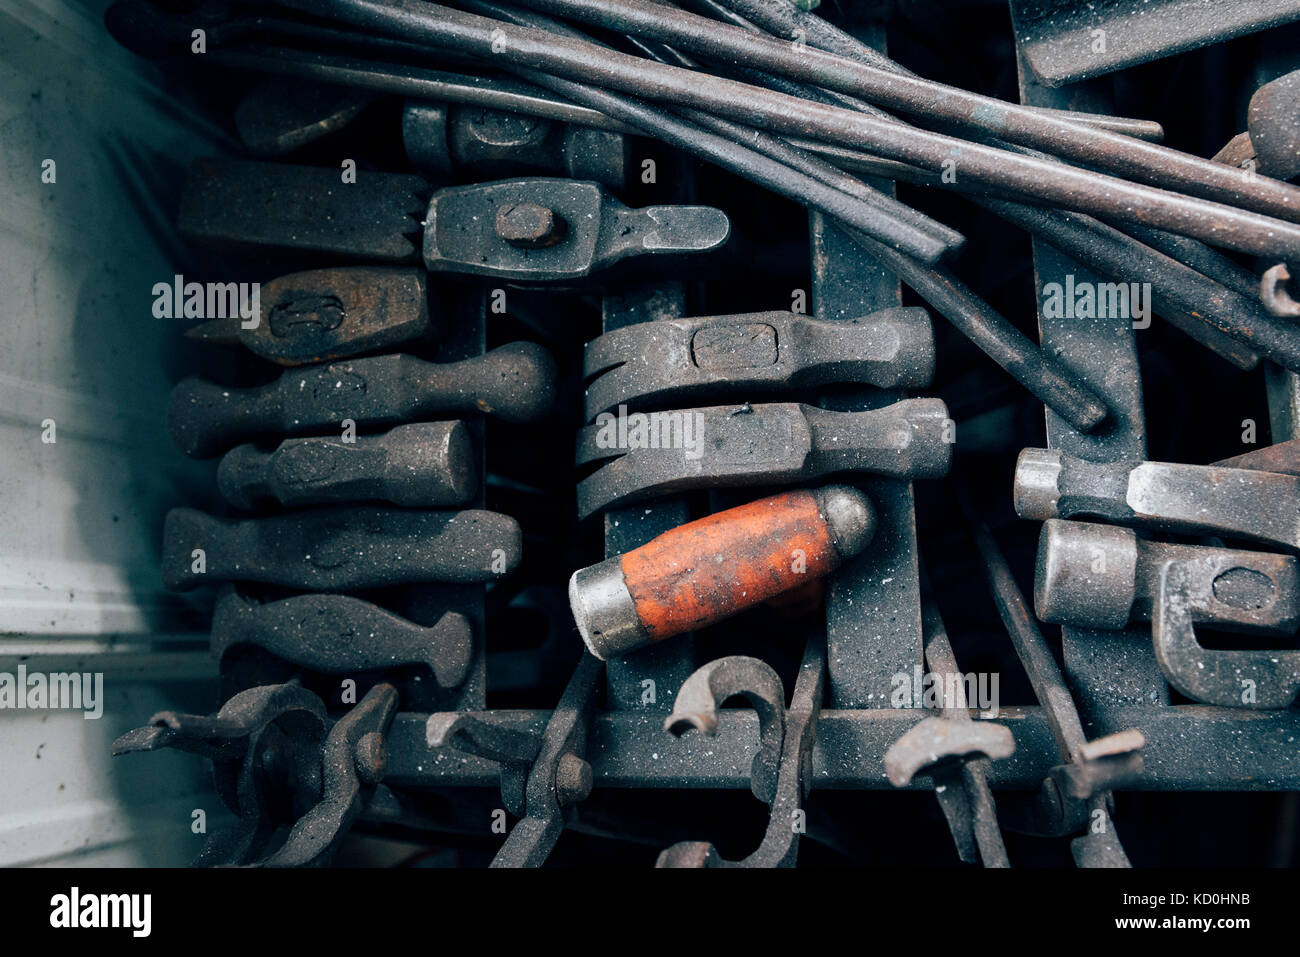 Overhead view of blacksmith tongs and hammers in workshop Stock Photo